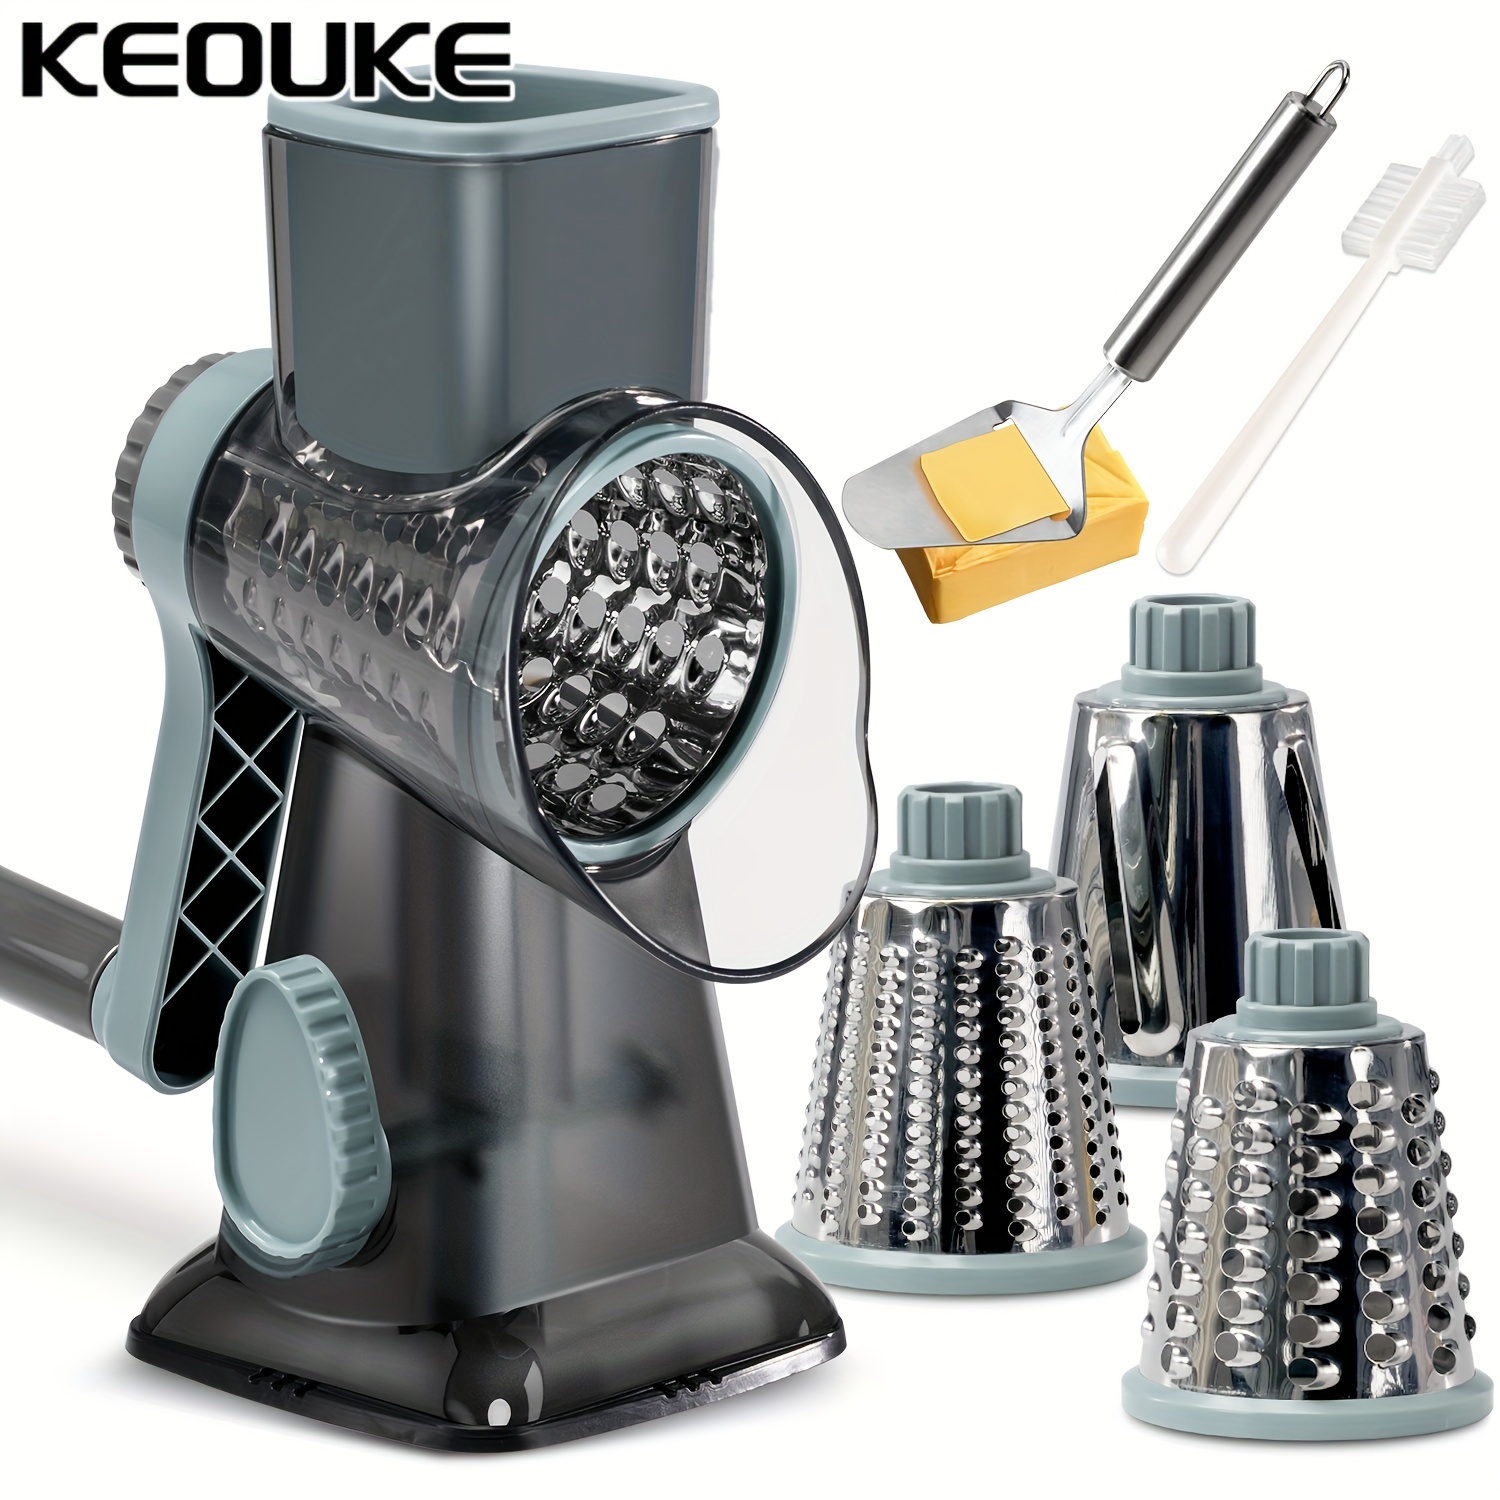 

Rotary Cheese Grater With Handle Vegetable Cheese Slicer Grater For Kitchen 3 Changeable Blades For Cheese Potato Zucchini Nuts Chocolate-transparent Greyblue